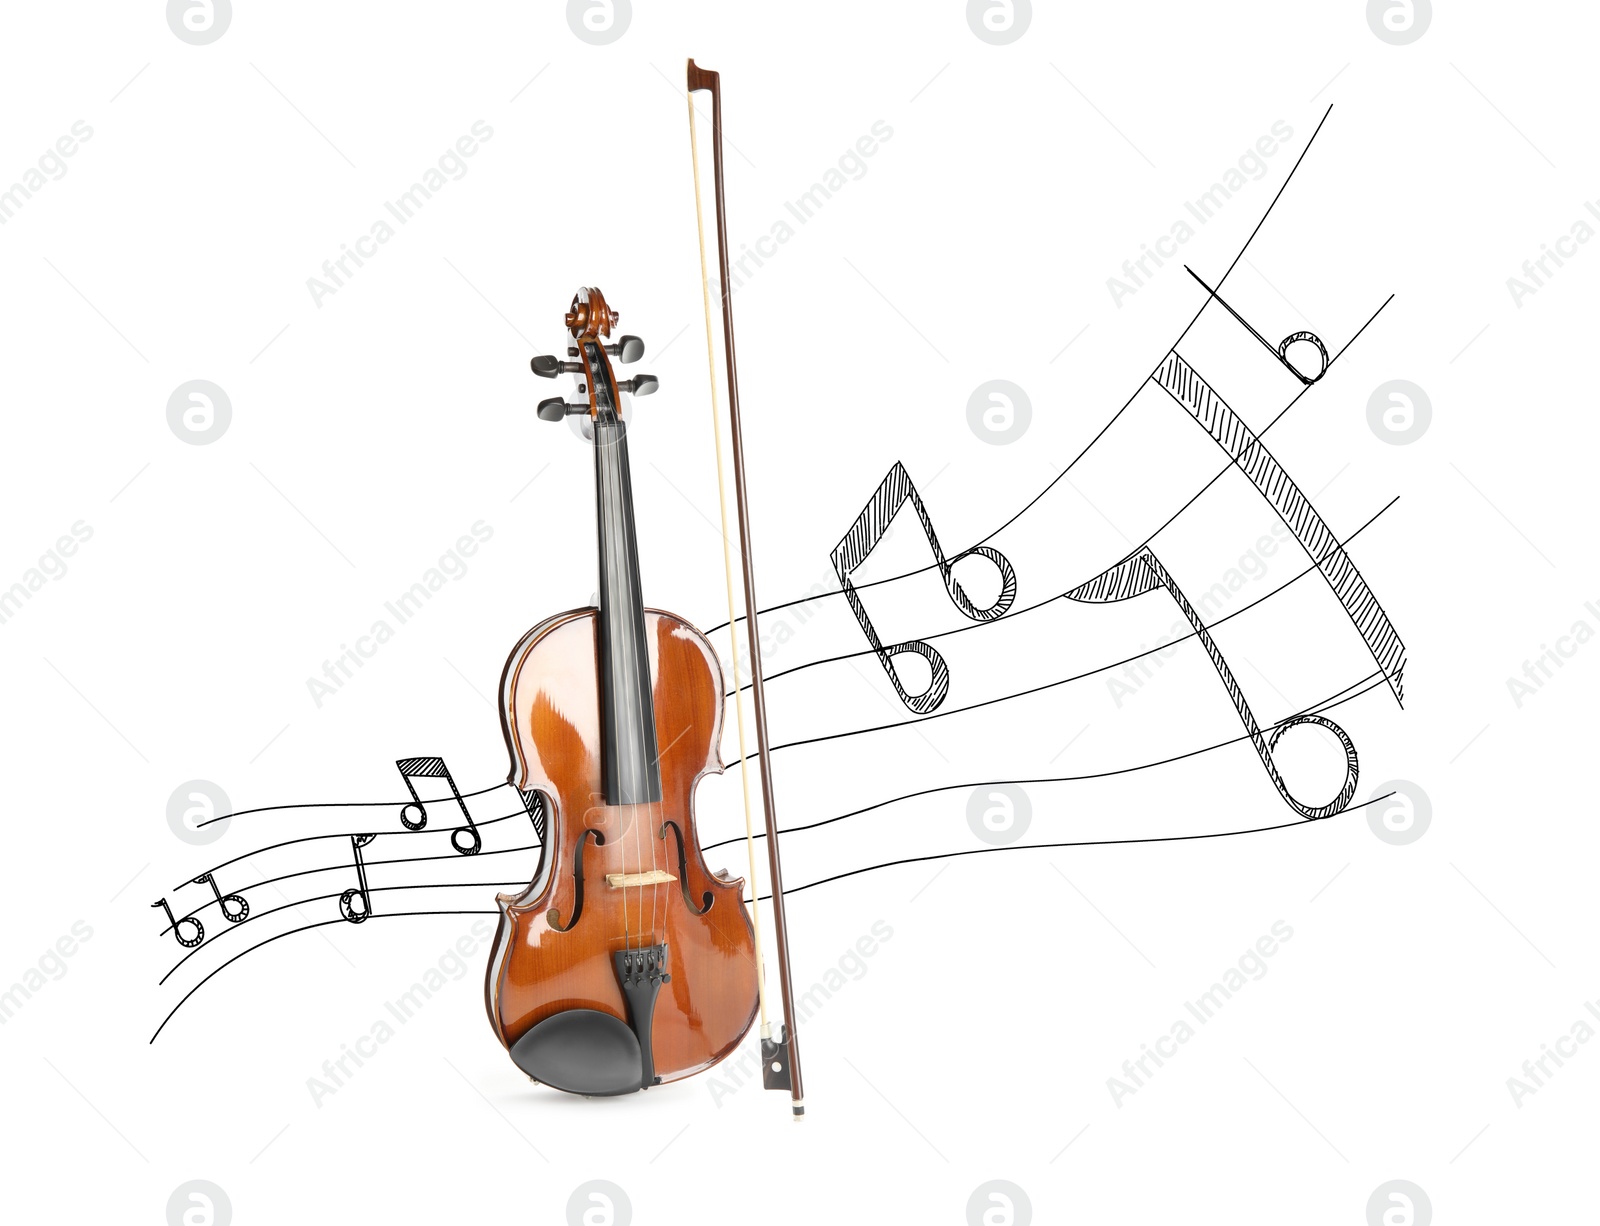 Image of Classic violin with bow and music notes on white background